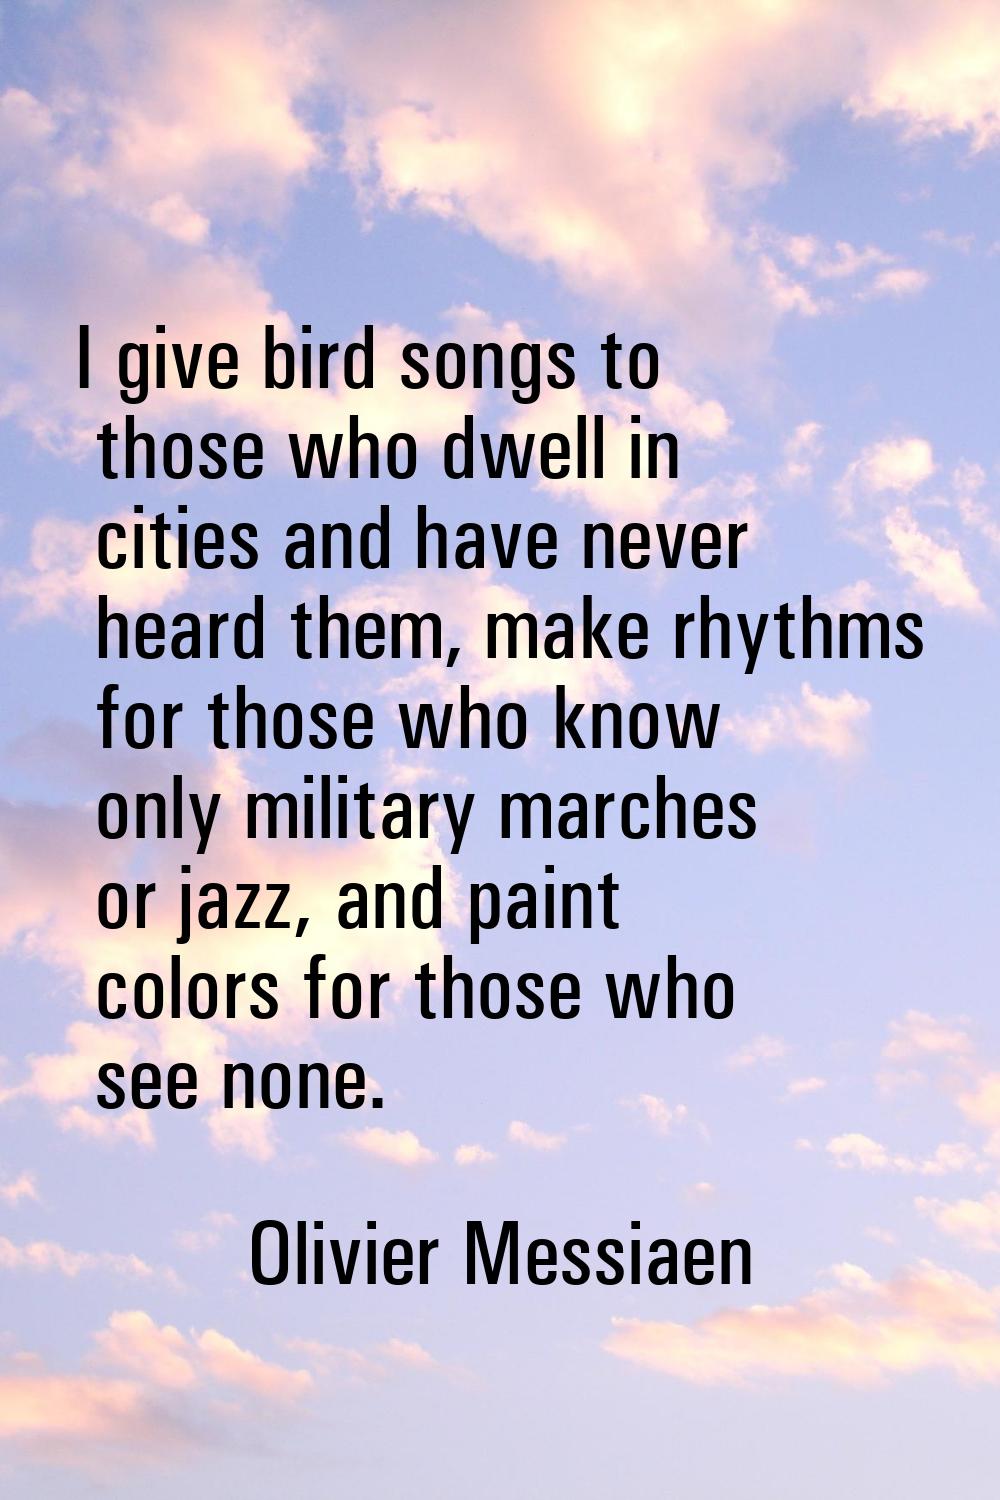 I give bird songs to those who dwell in cities and have never heard them, make rhythms for those wh